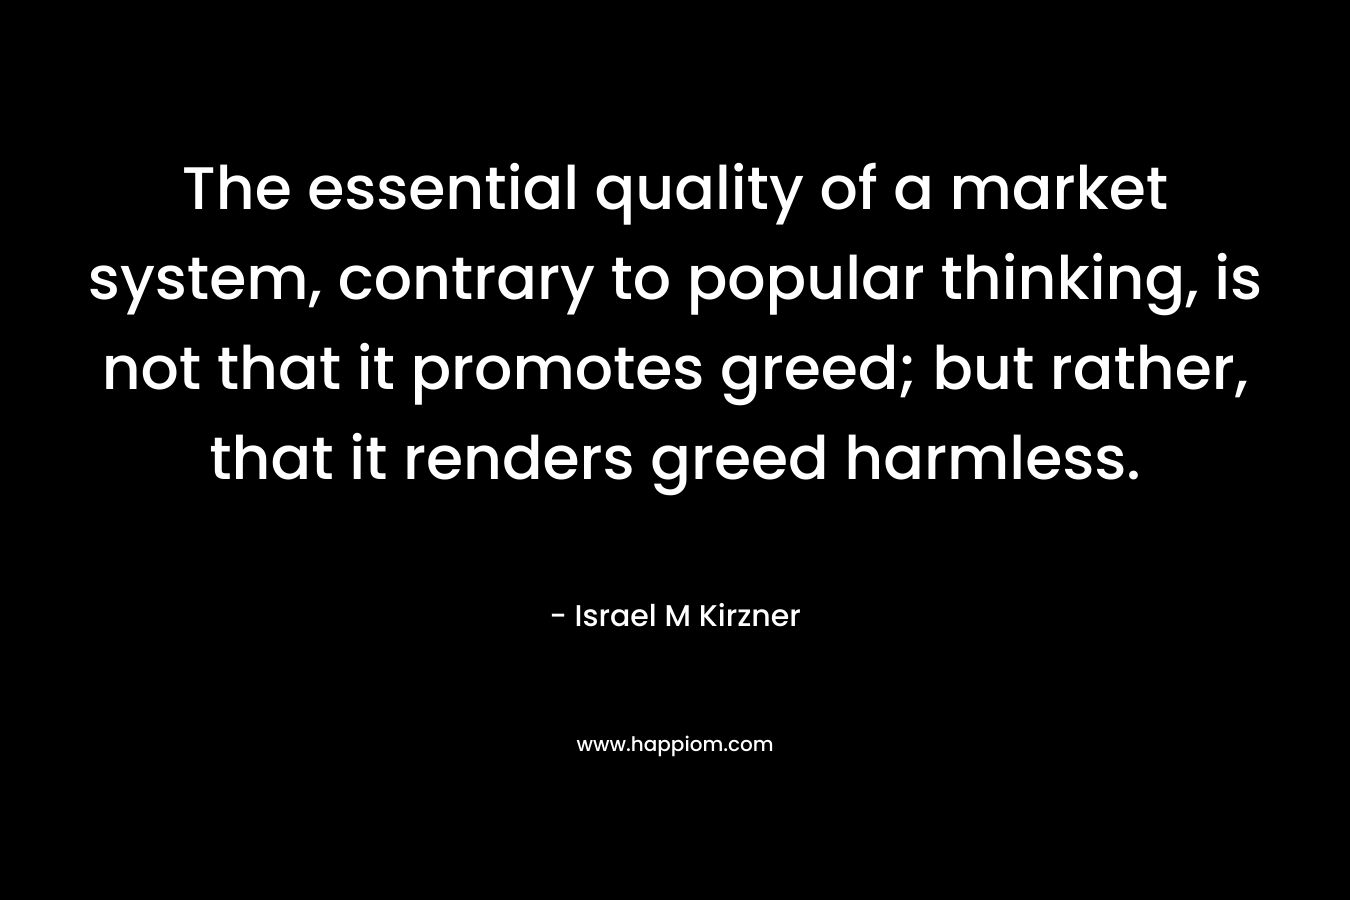 The essential quality of a market system, contrary to popular thinking, is not that it promotes greed; but rather, that it renders greed harmless. – Israel M Kirzner